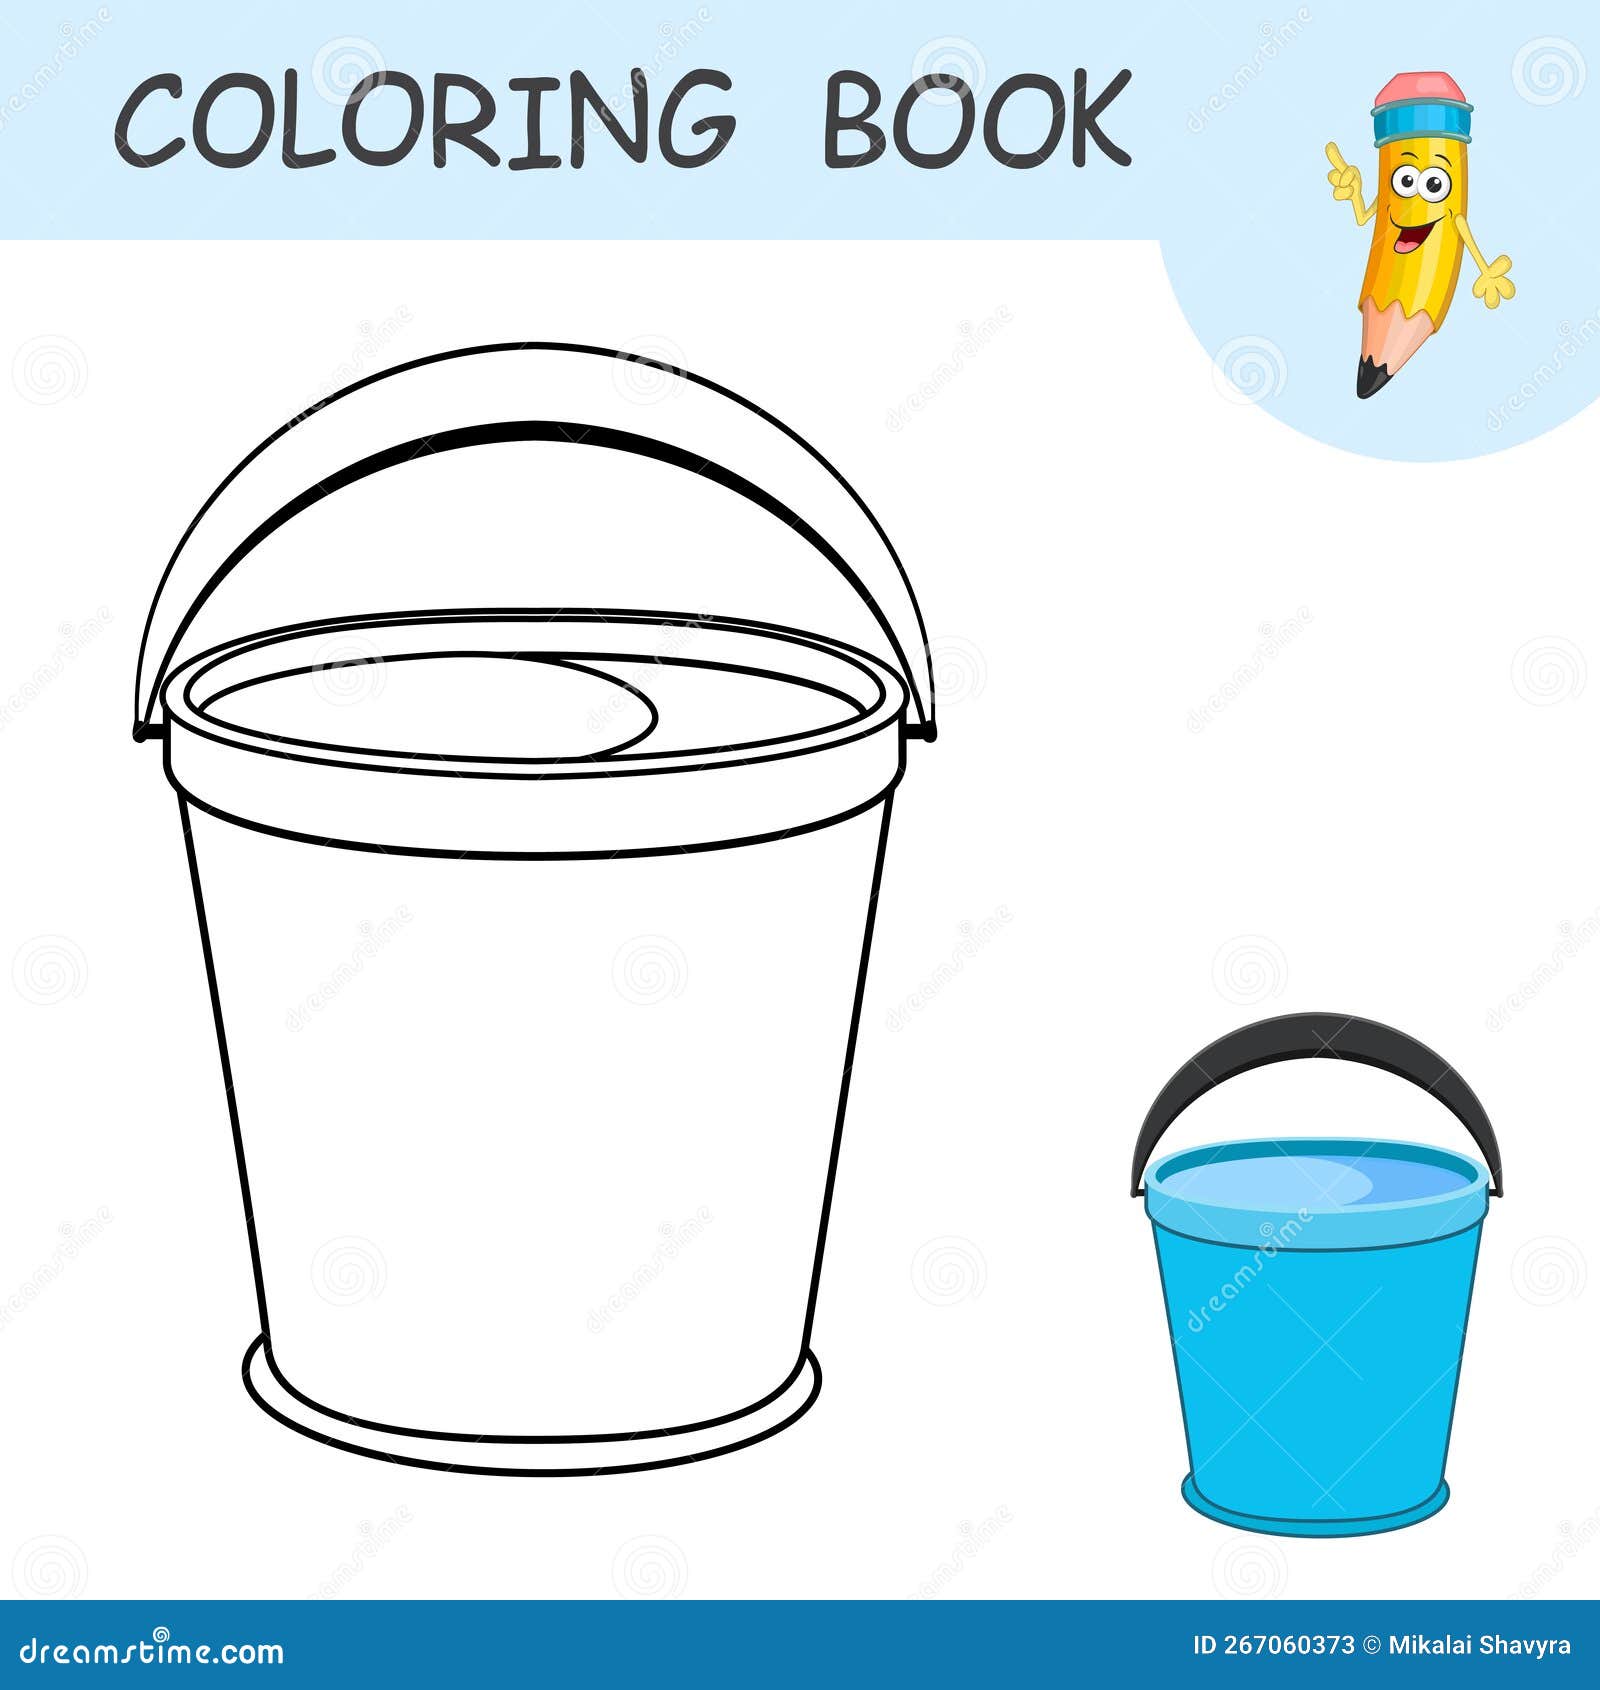 Coloring book with cartoon bucket of water with a handle raised up template of colorless and color samples water pail on coloring stock vector